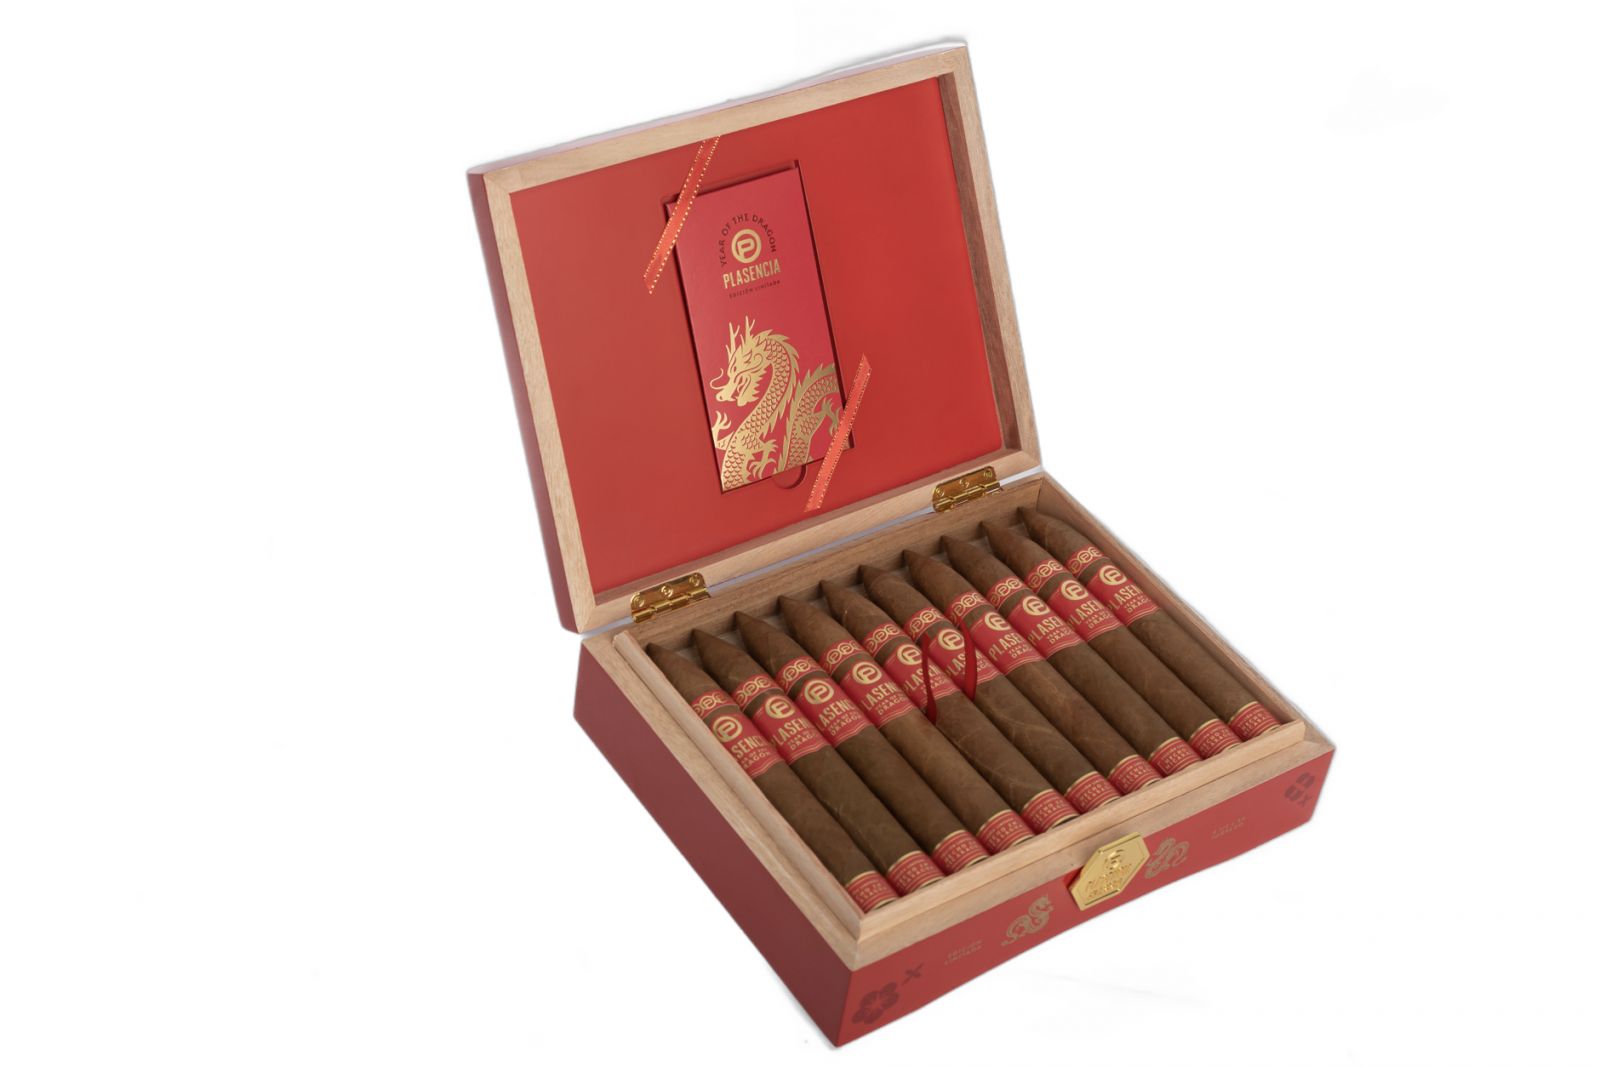 plasencia-limited-edition-year-of-the-dragon-binh-dinh